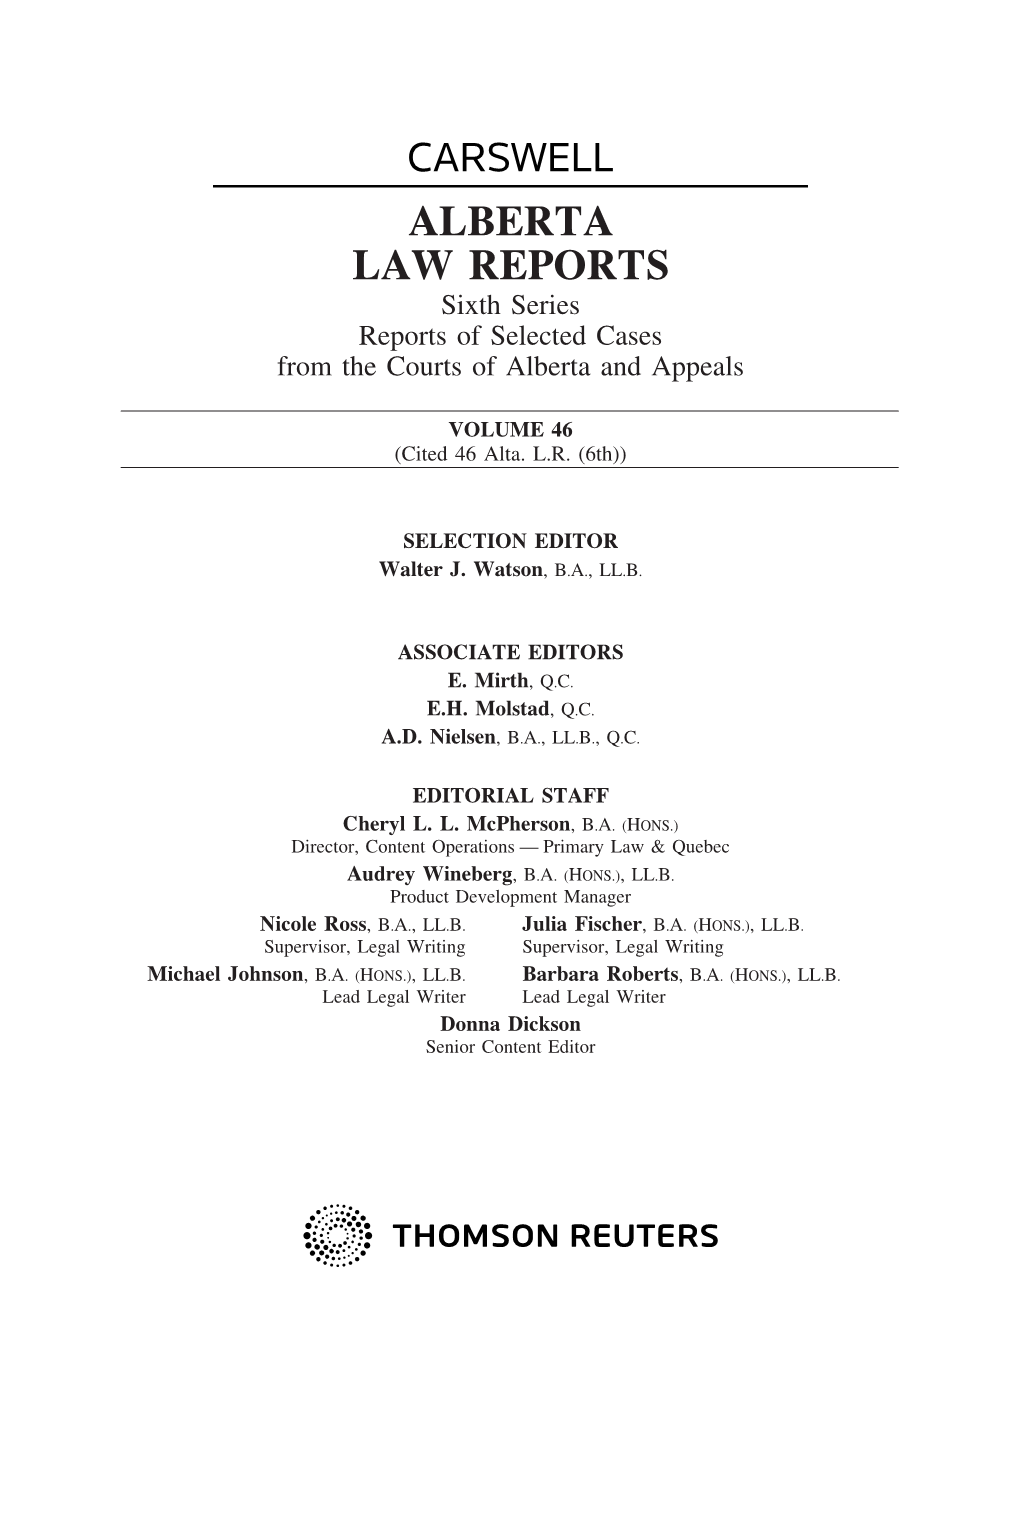 ALBERTA LAW REPORTS Sixth Series Reports of Selected Cases from the Courts of Alberta and Appeals